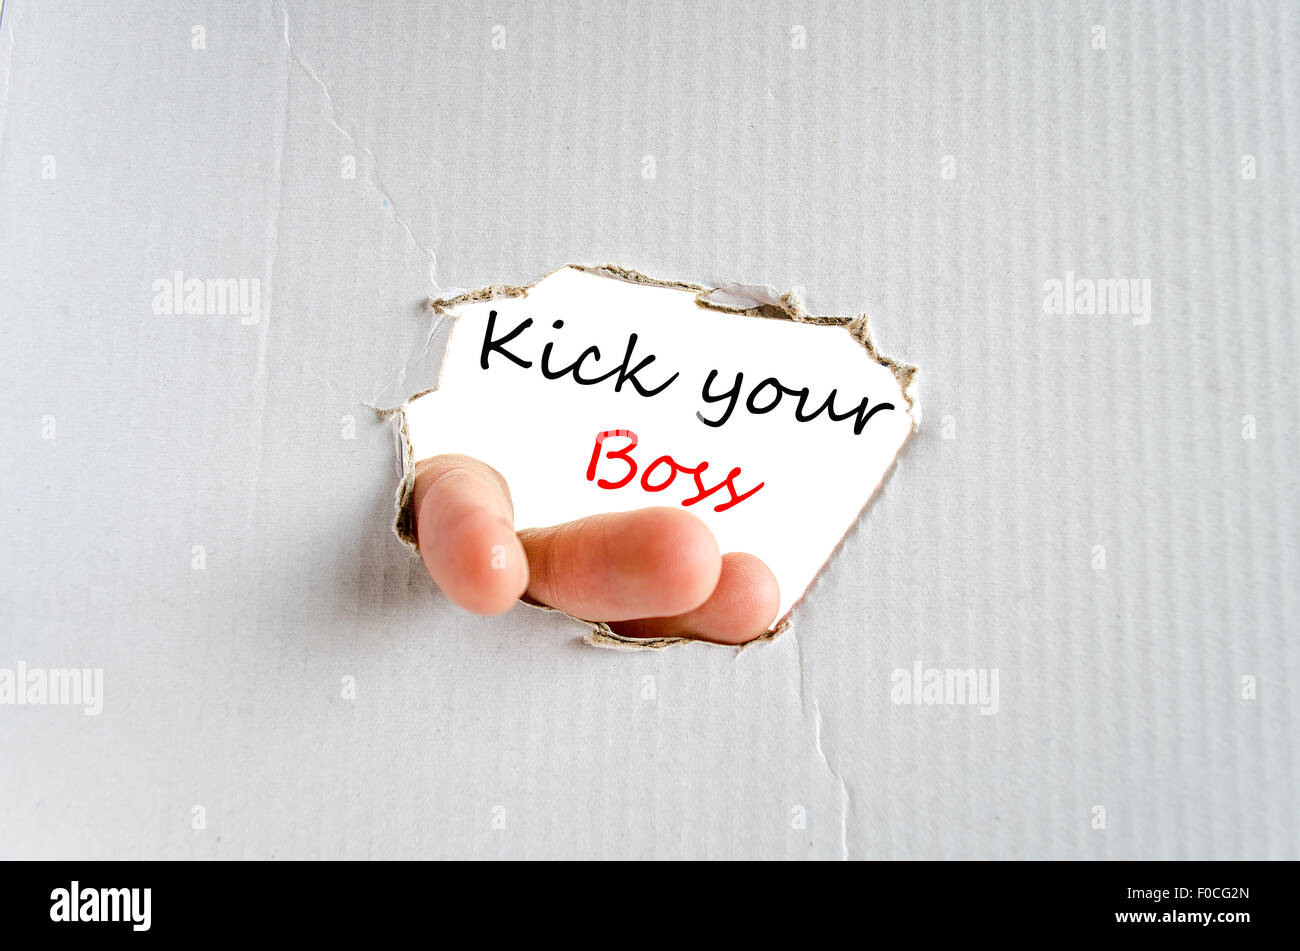 Kick your boss text concept isolated over white background Stock Photo -  Alamy